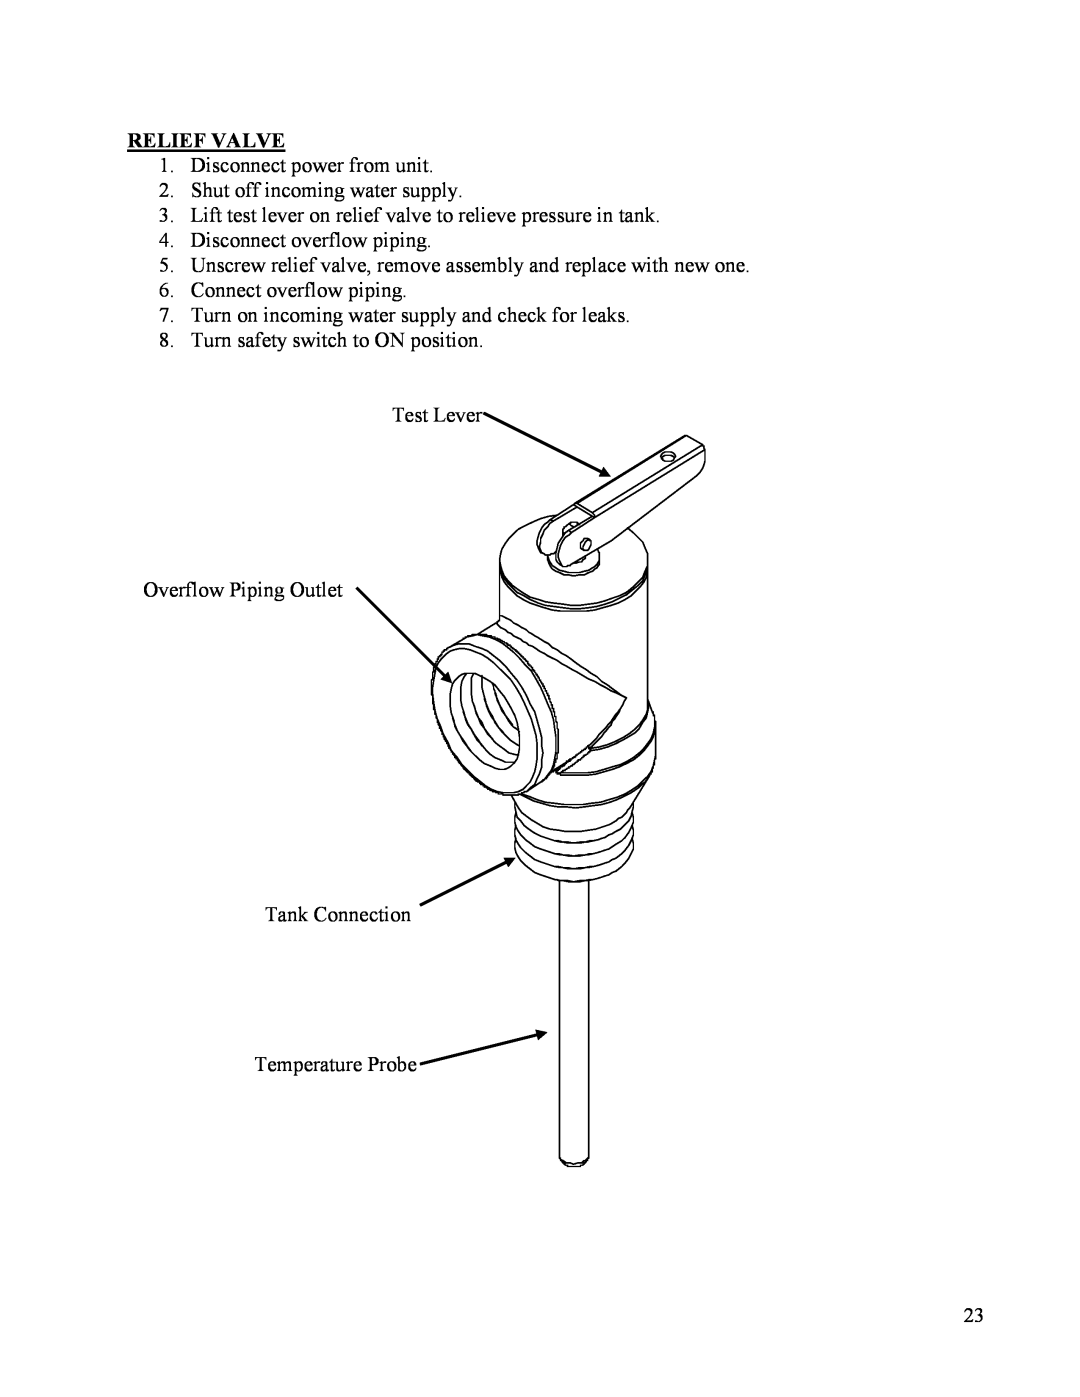 Hubbell Electric Heater Company SE manual Relief Valve 